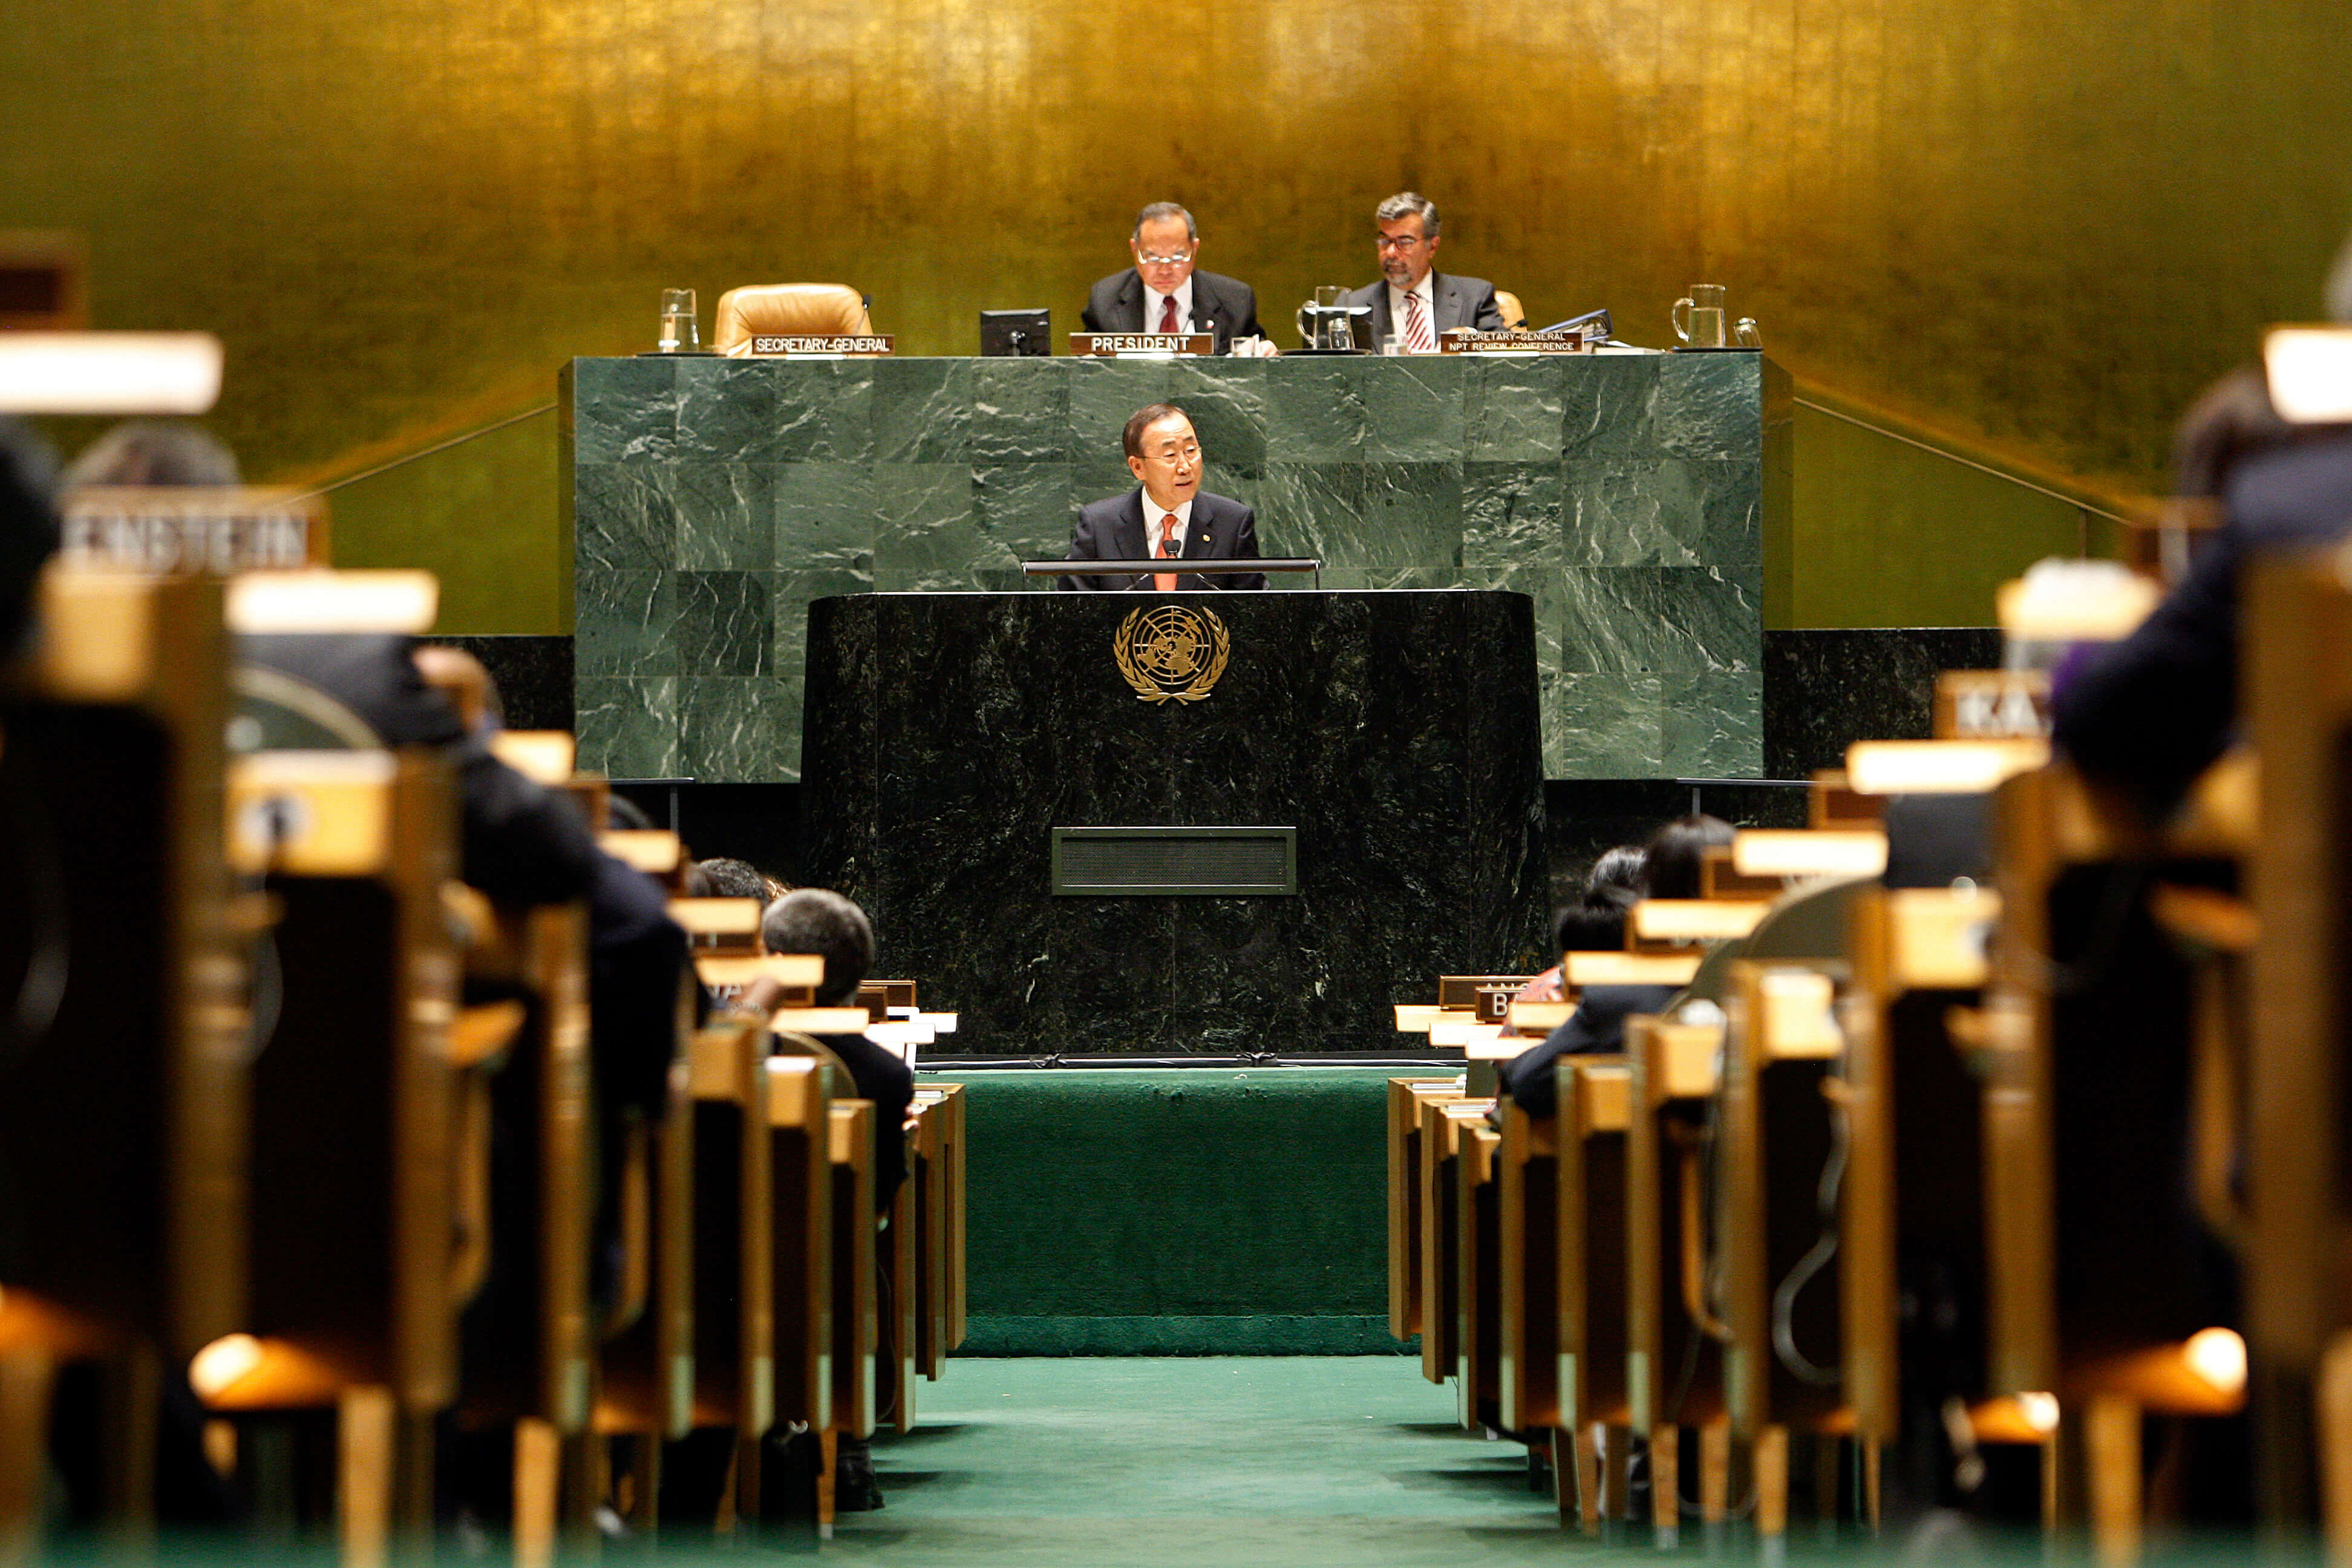 UN Secretary-General Ban Ki-moon urged nations to make nuclear disarmament targets a reality at the NPT Conference of 2010. © United Nations Photo